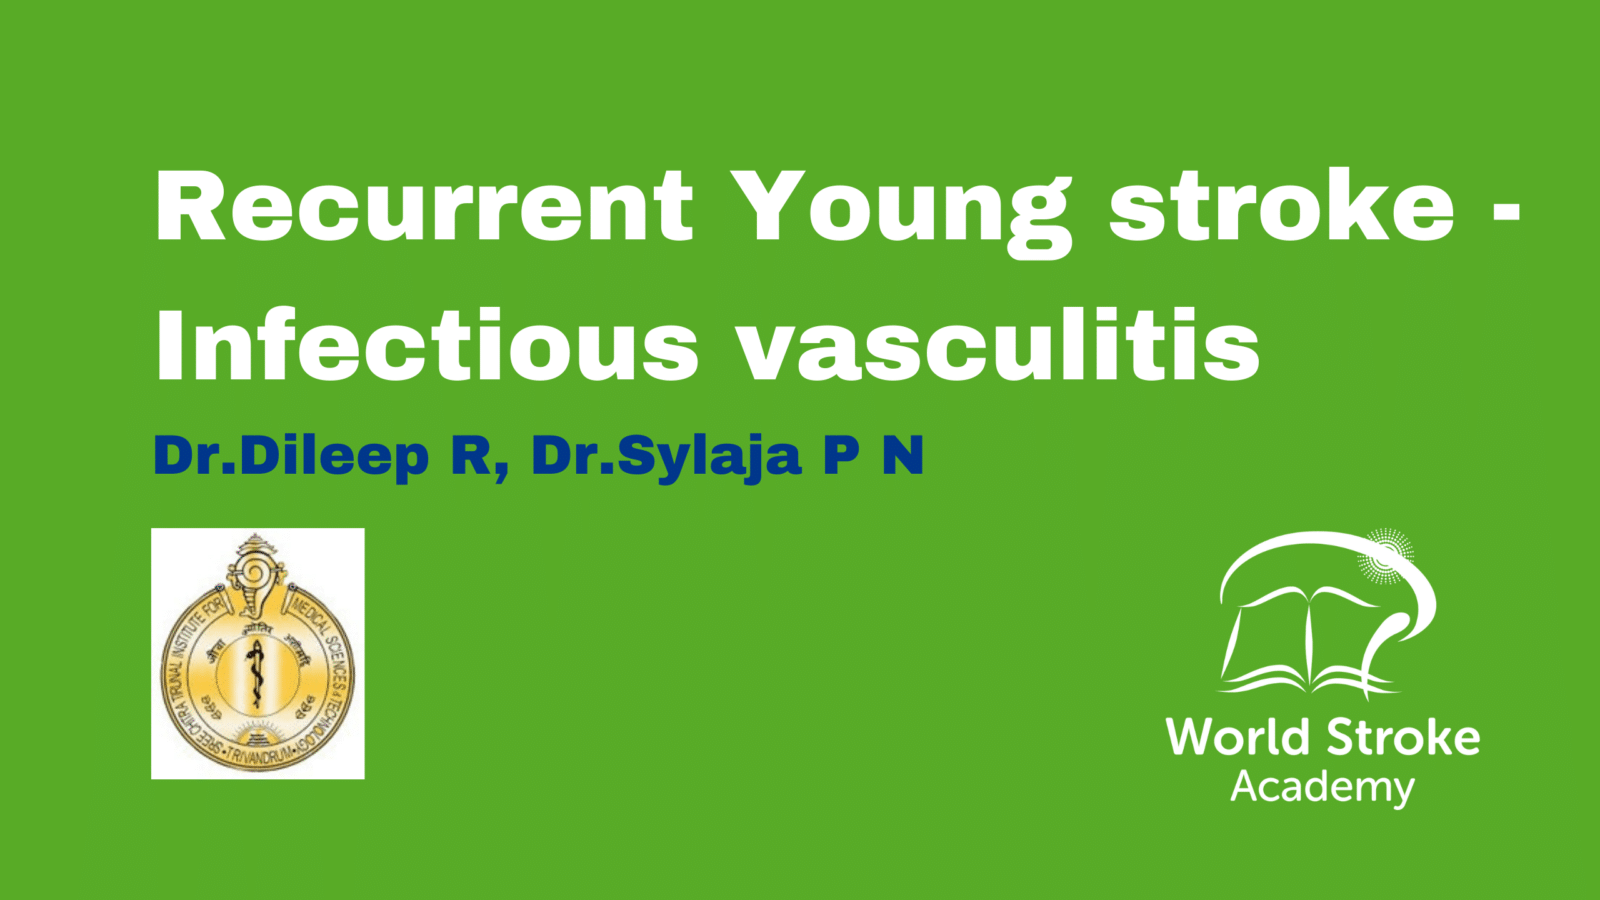 Case Study – Recurrent Young stroke: Infectious vasculitis